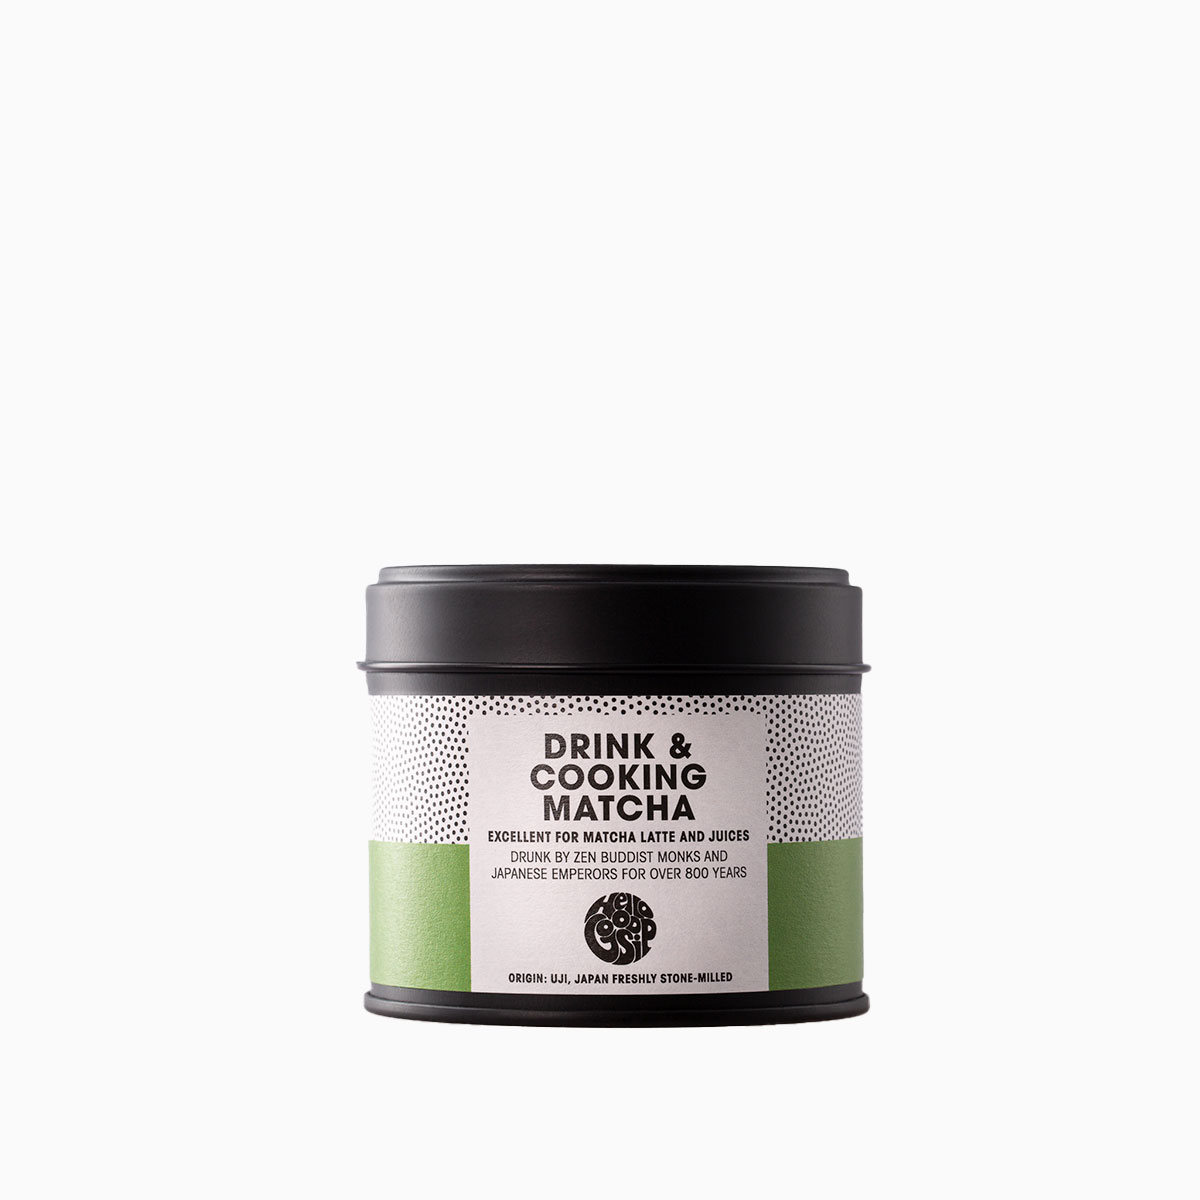 DRINK & COOKING MATCHA 50g